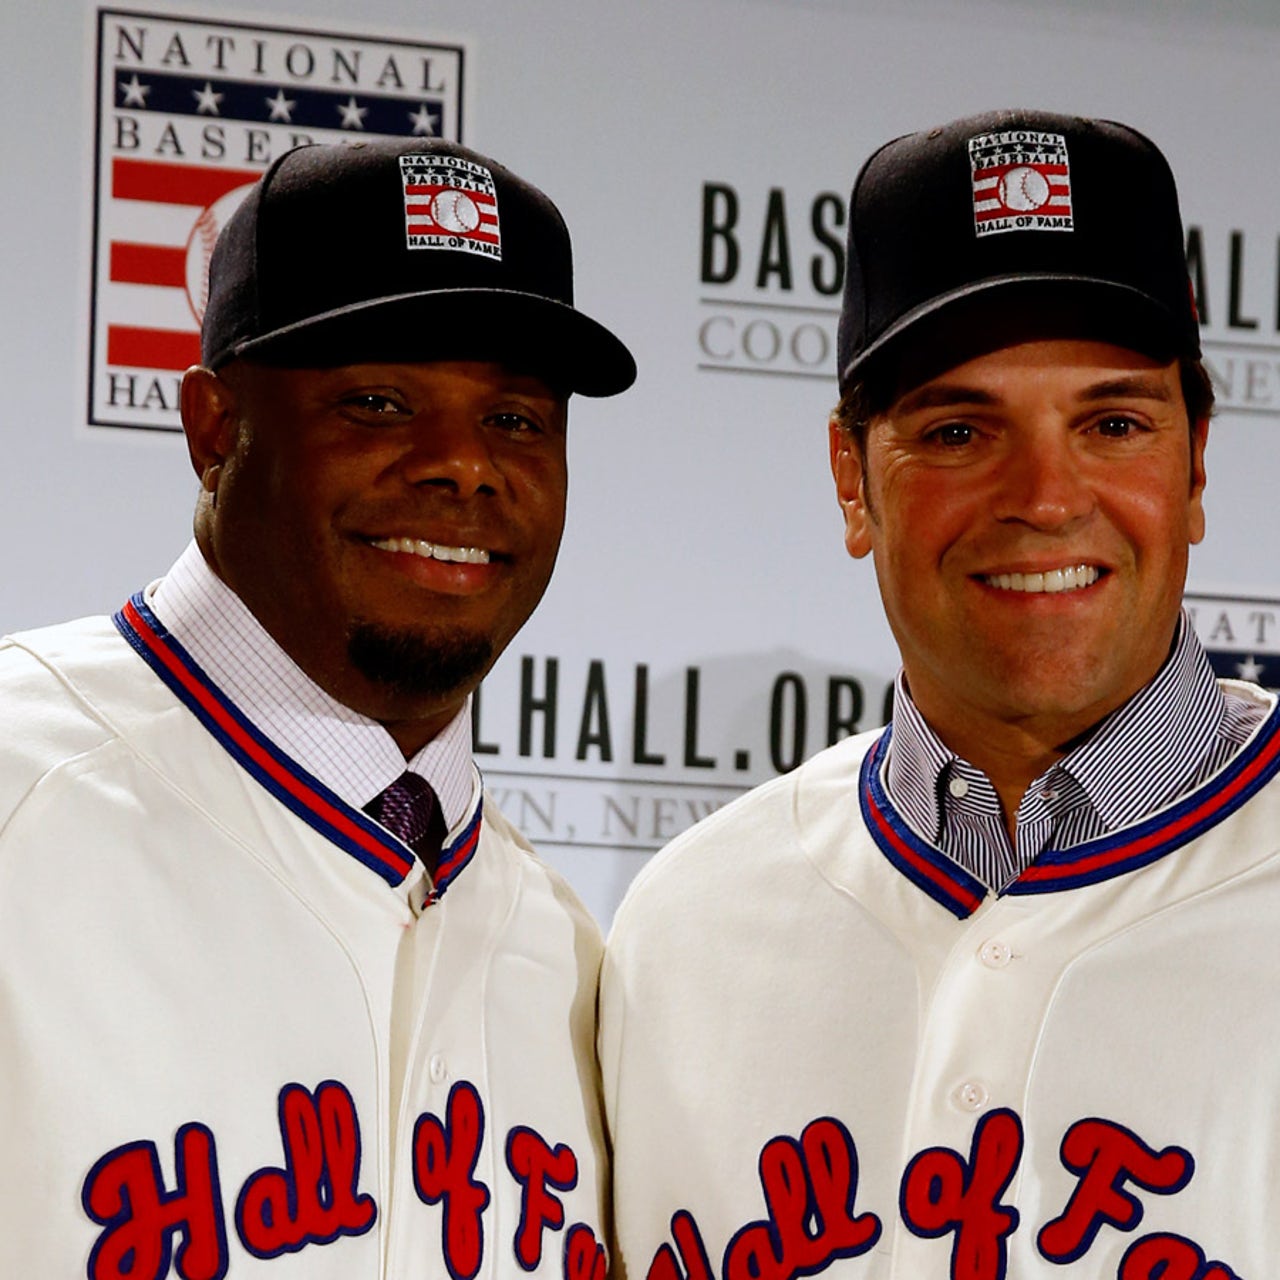 Stock market rallies after Ken Griffey Jr., Mike Piazza ring opening bell